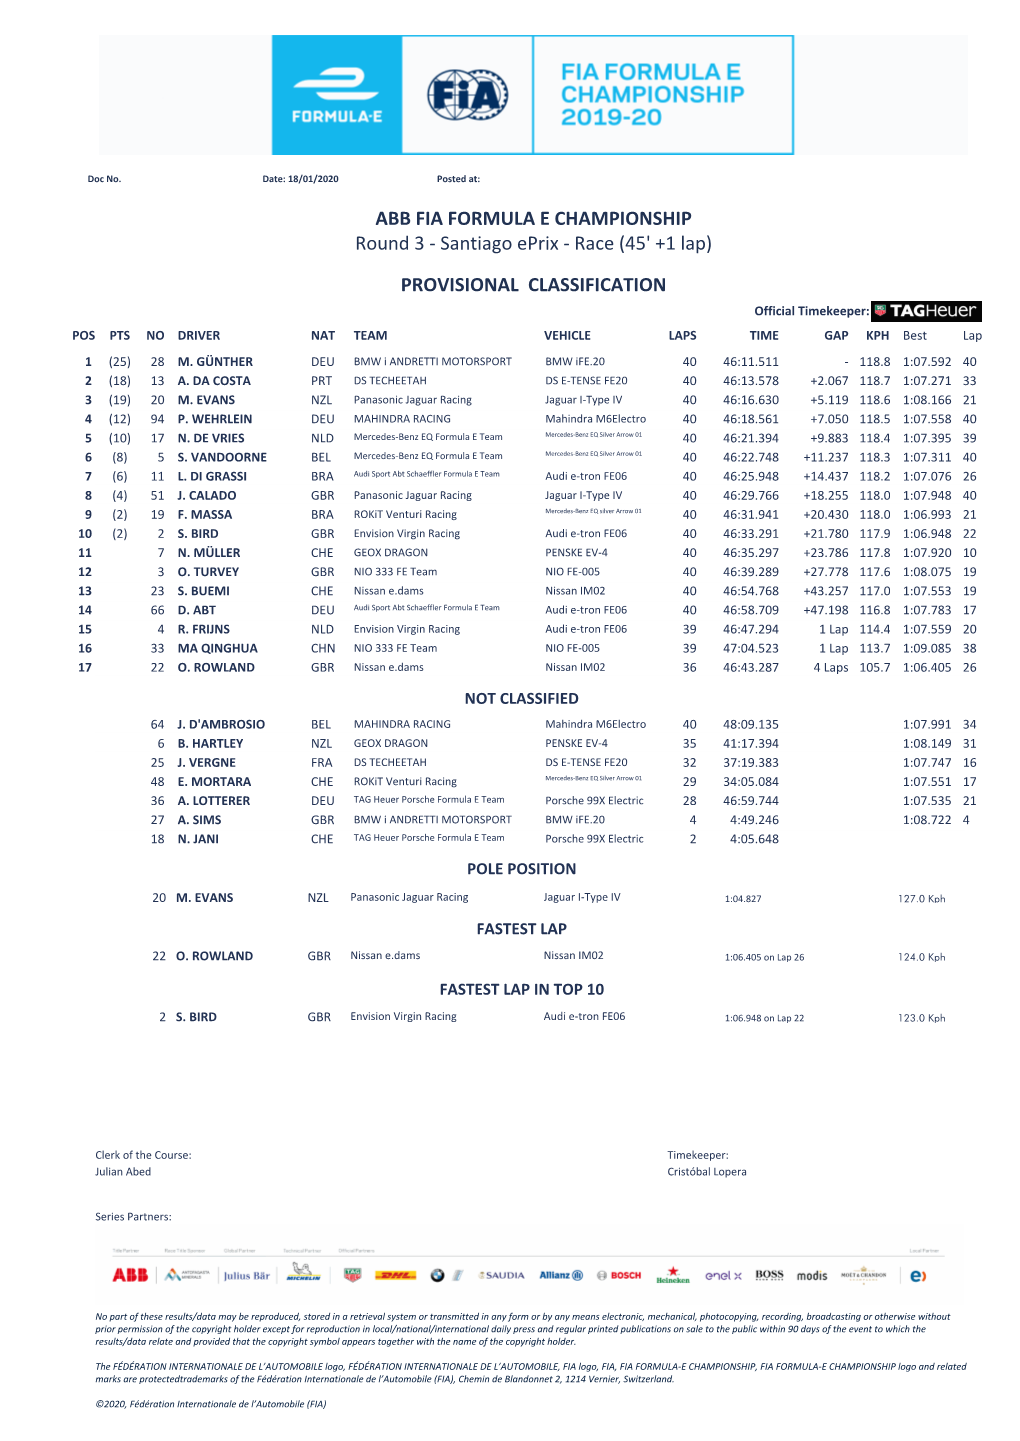 PROVISIONAL CLASSIFICATION Round 3